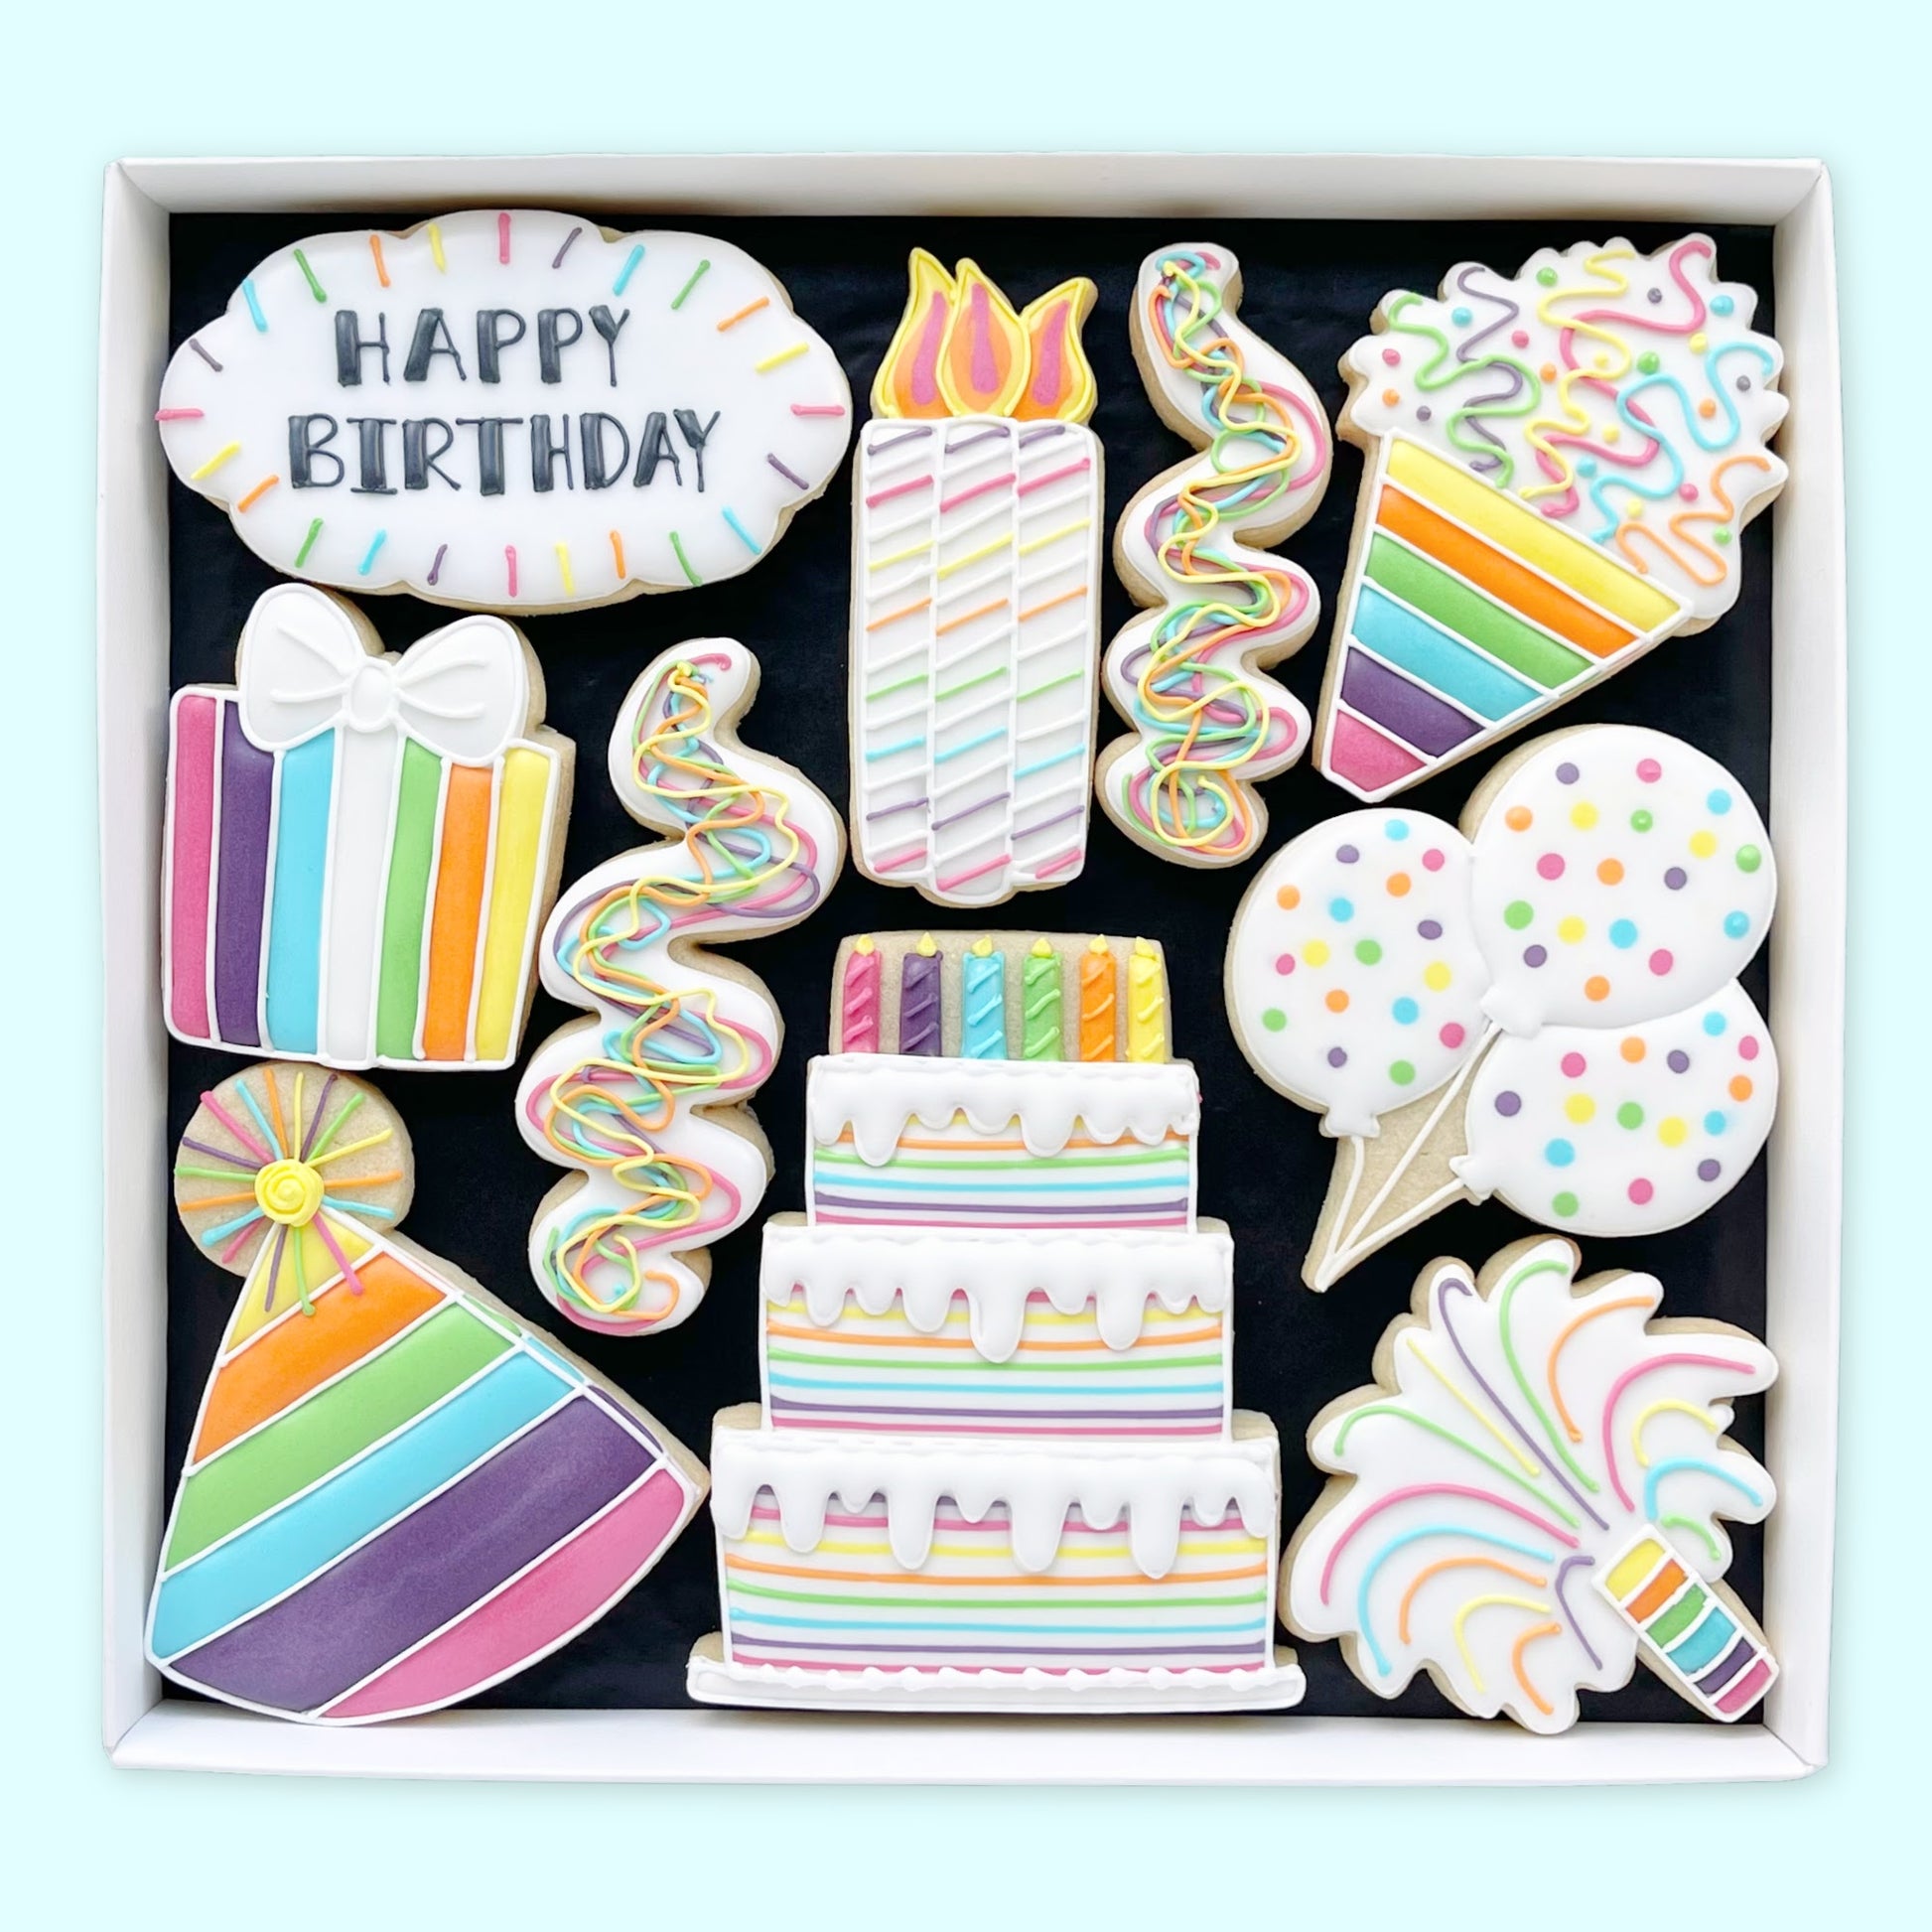 Rainbow happy birthday hand iced biscuits by Katie's Biscuit shop in an open white gift box 